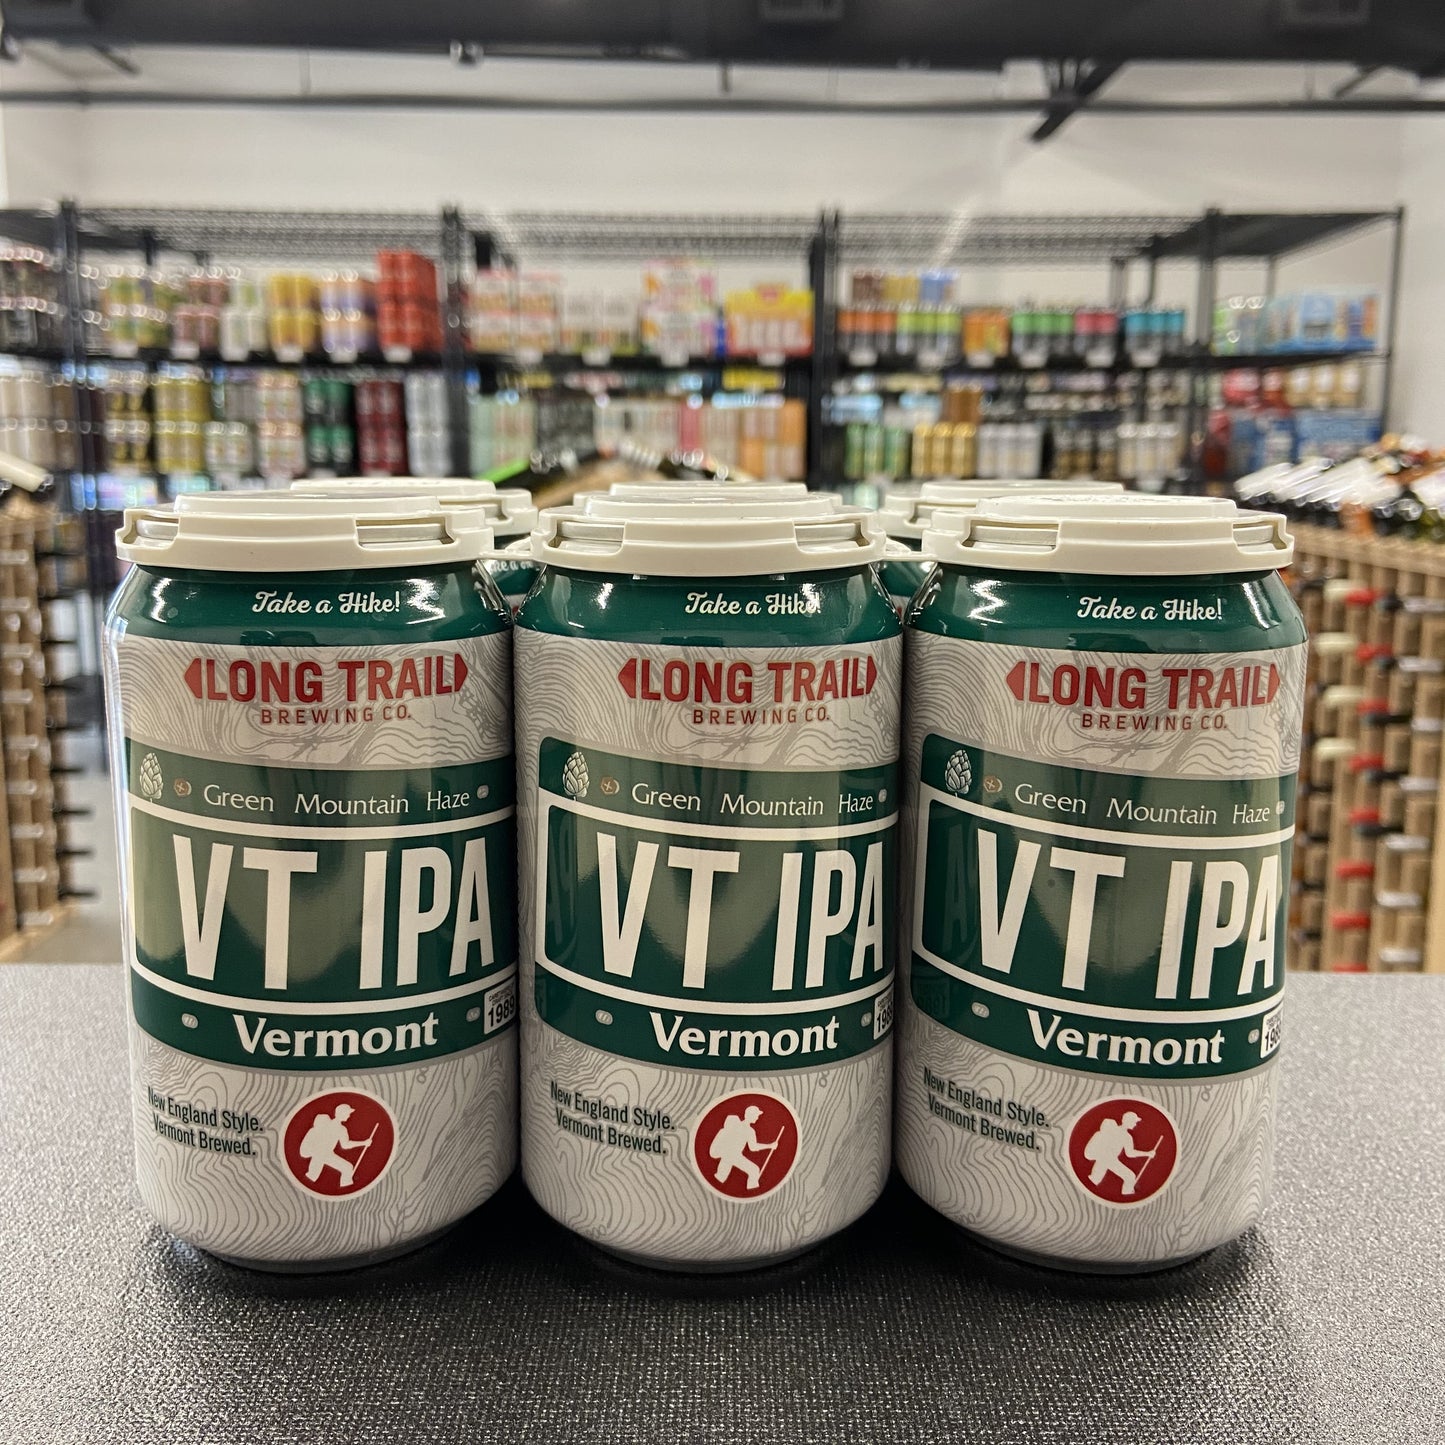 Long Trail Brewing Co. VT IPA